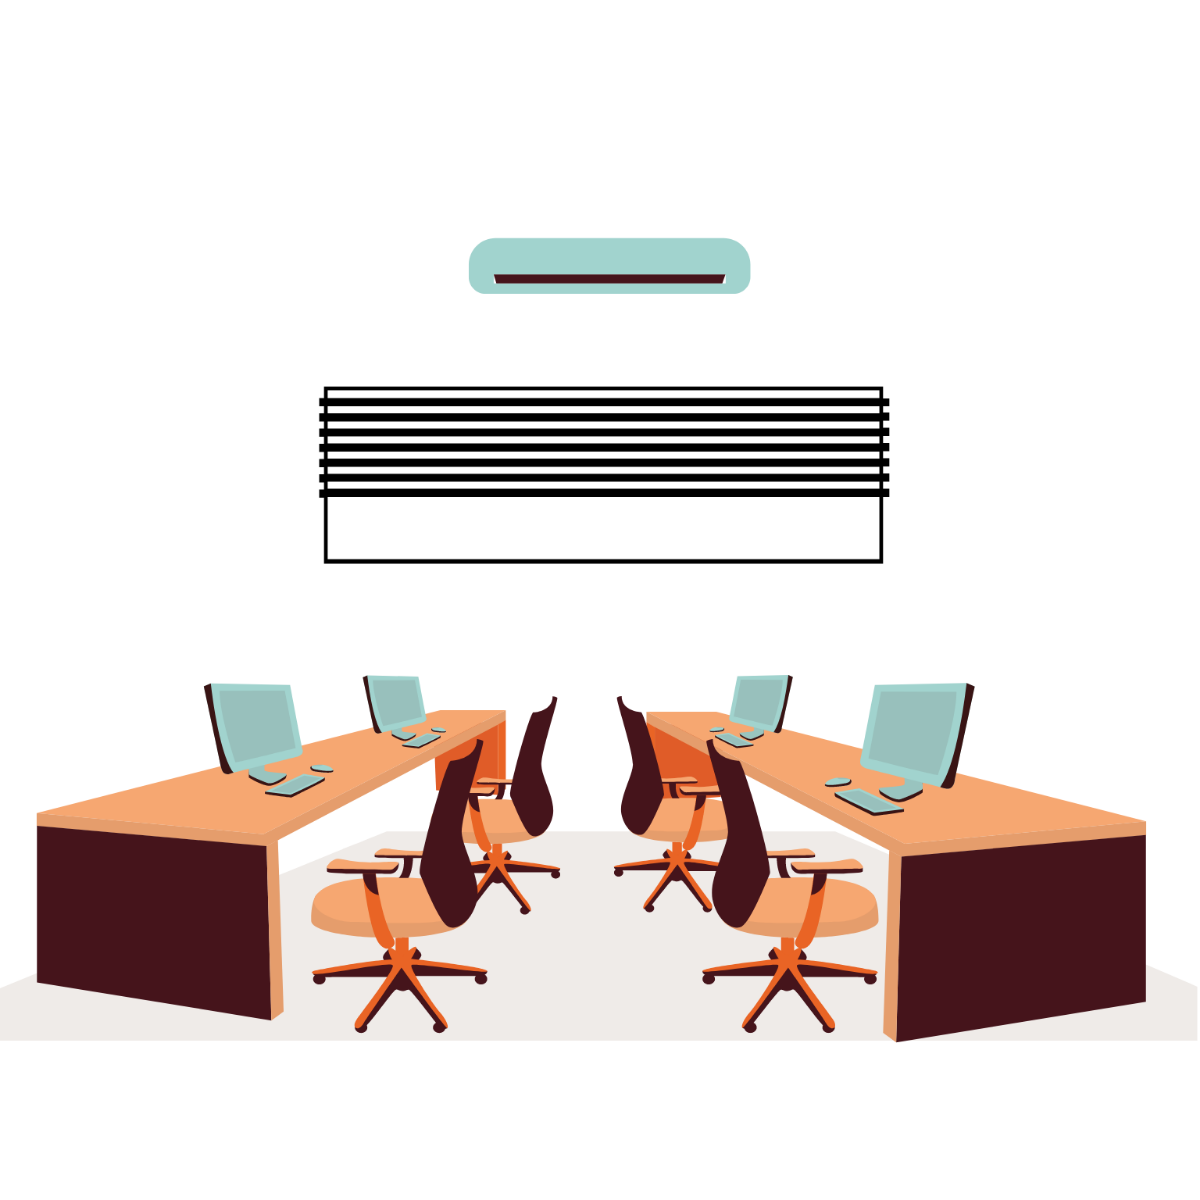 Free Office Environment Vector Template